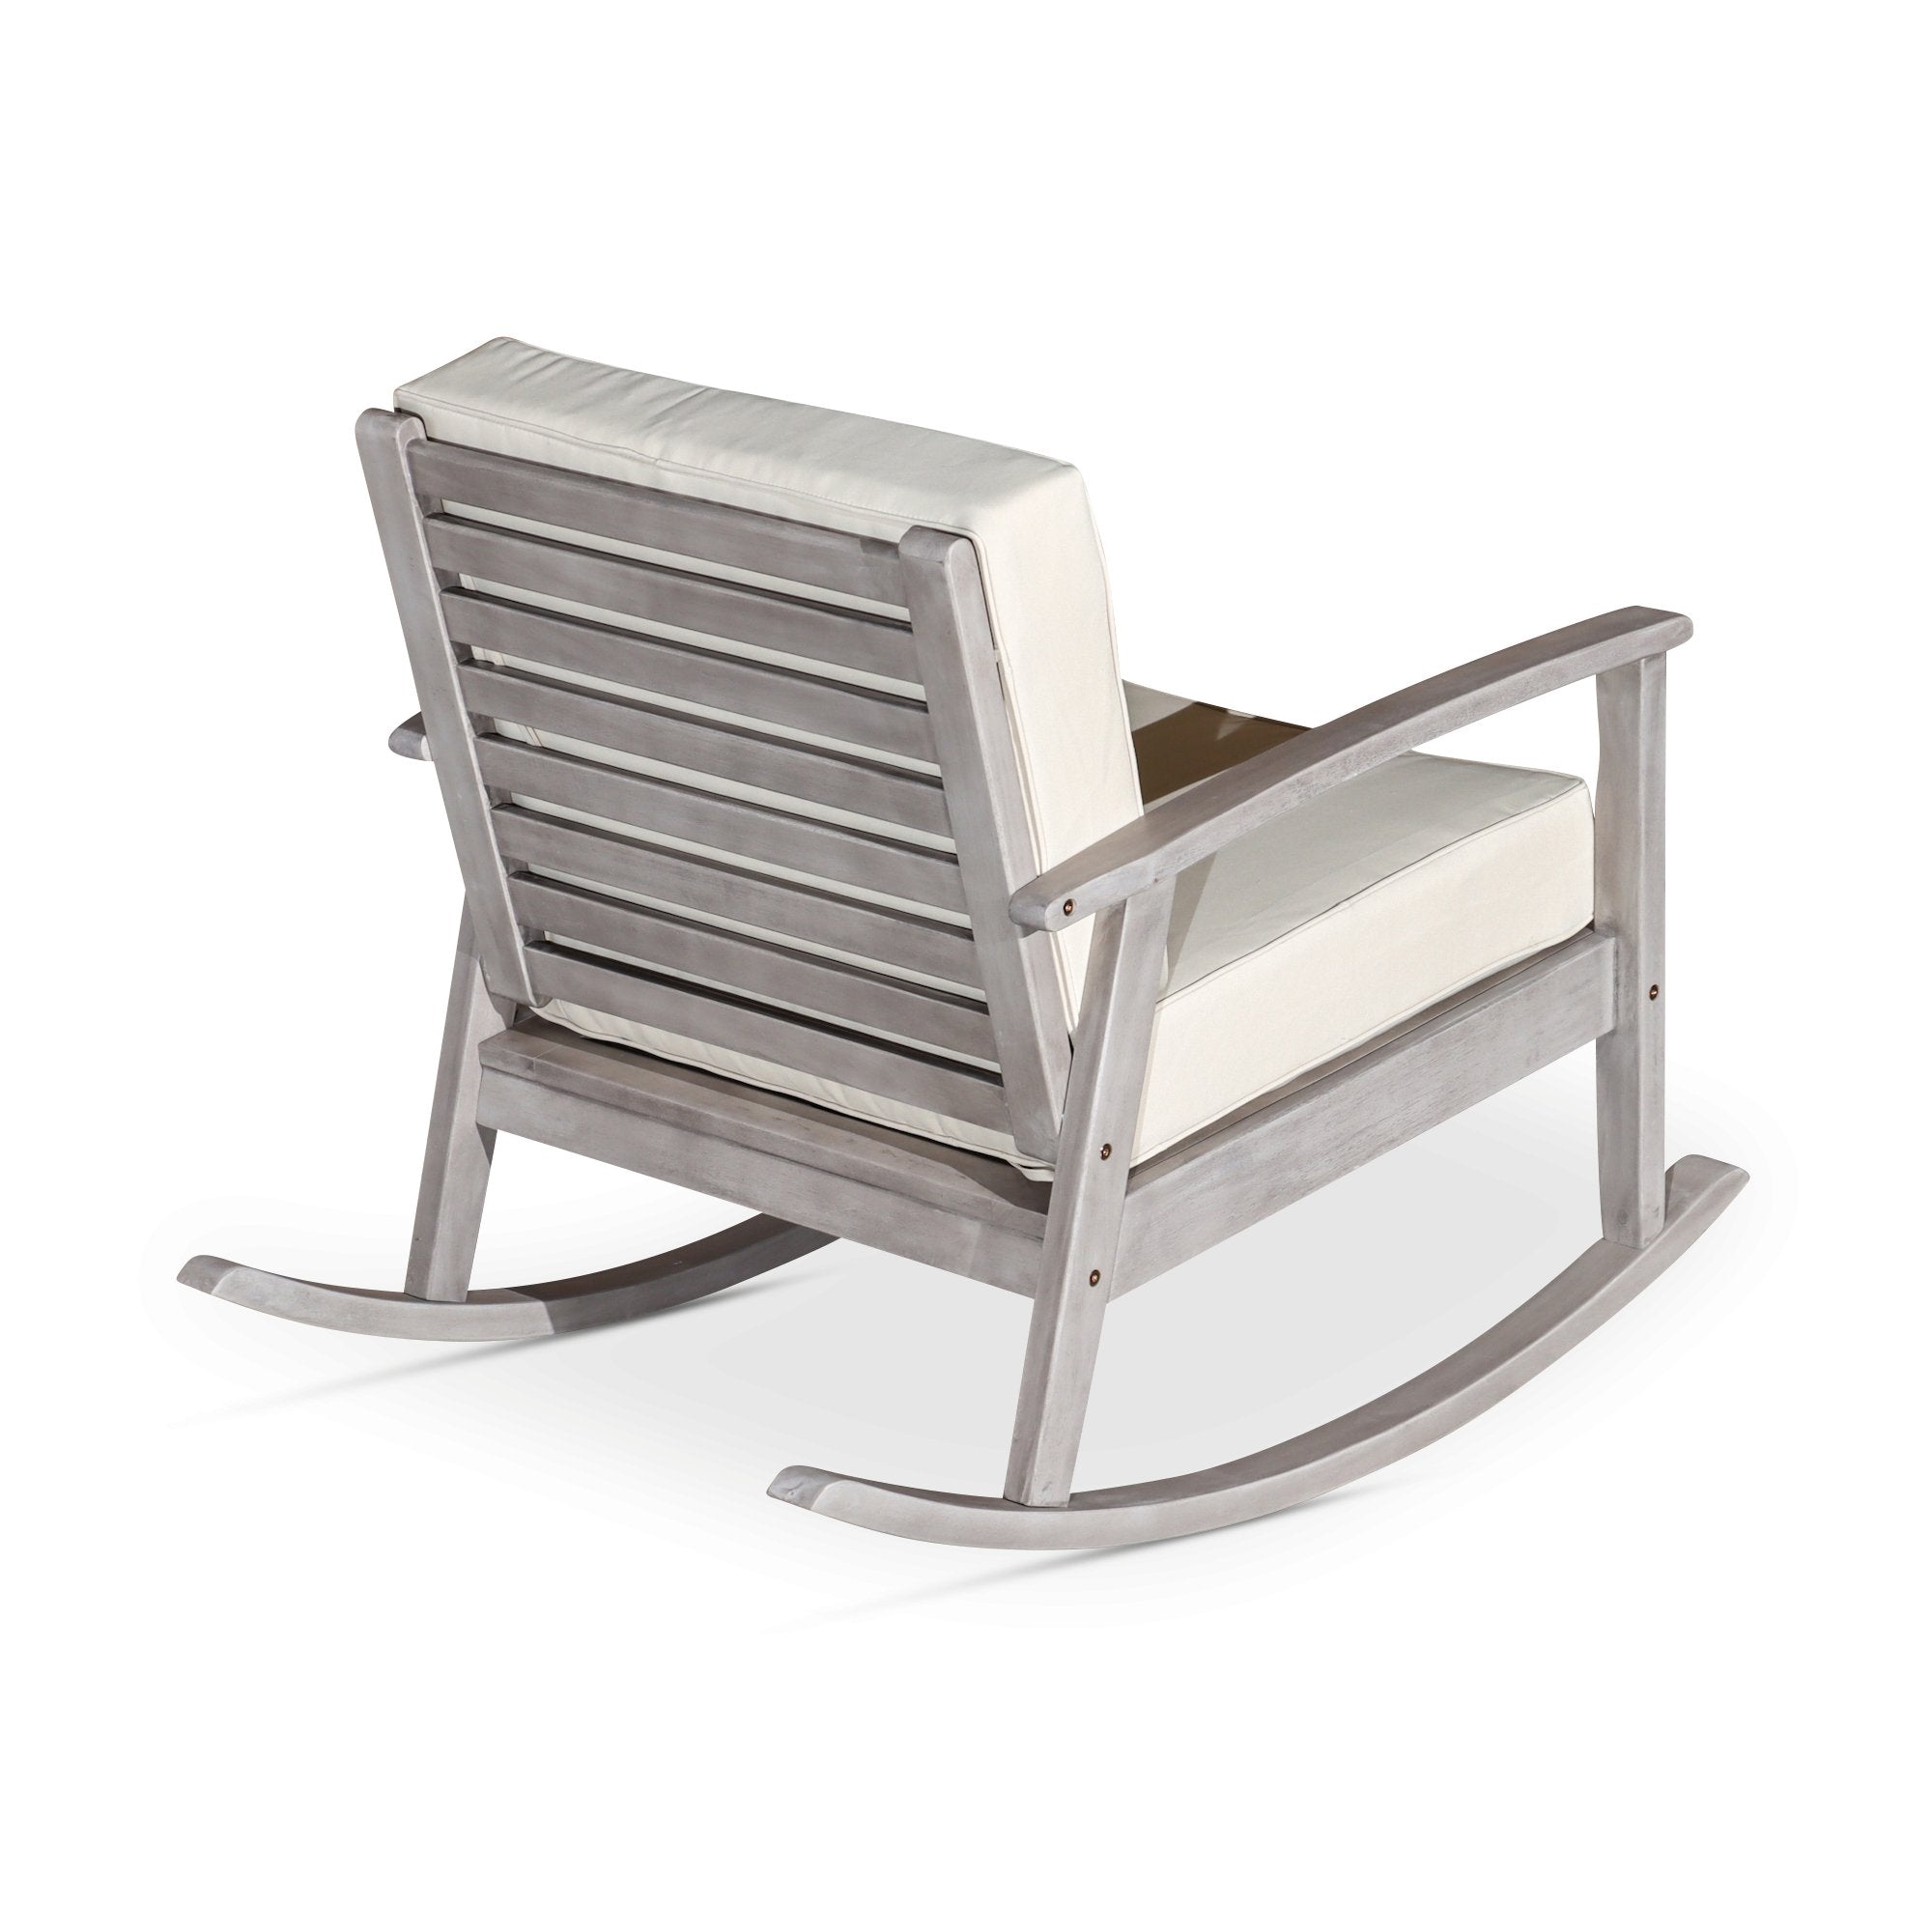 Outdoor Rocking Chair with Cushions, Silver Gray Finish, Burgundy Cushions - Tuesday Morning-Chairs & Seating